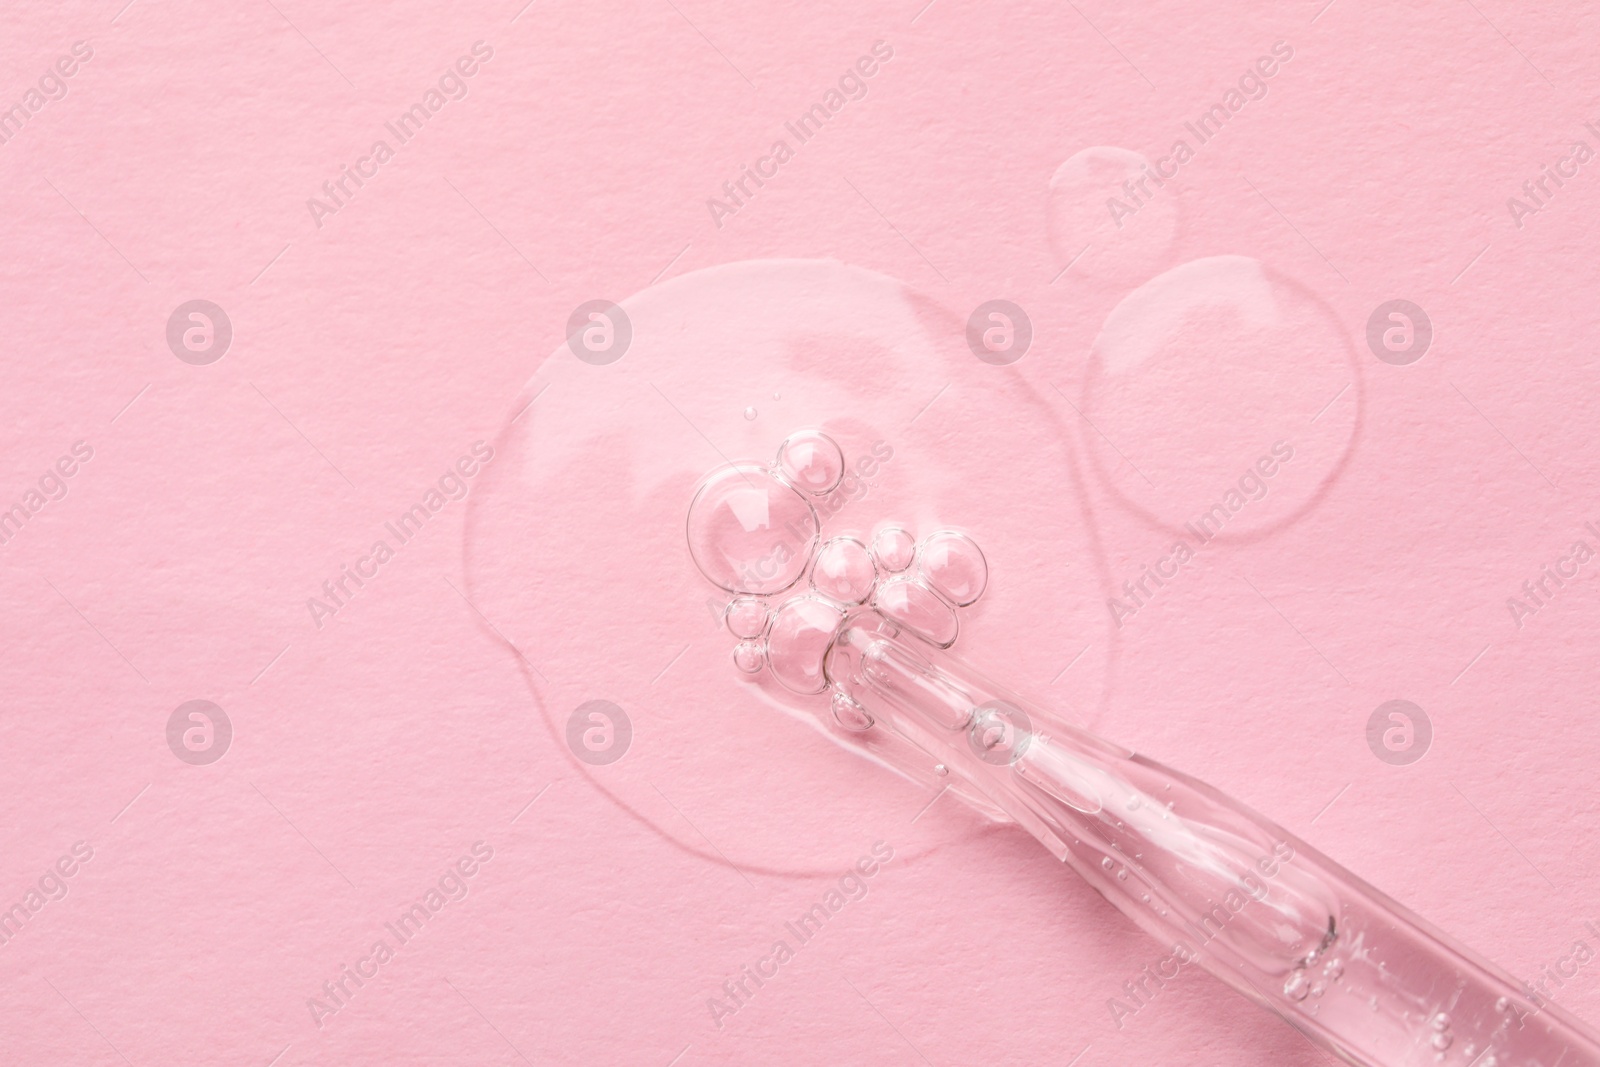 Photo of Glass pipette and transparent liquid on light pink background, top view